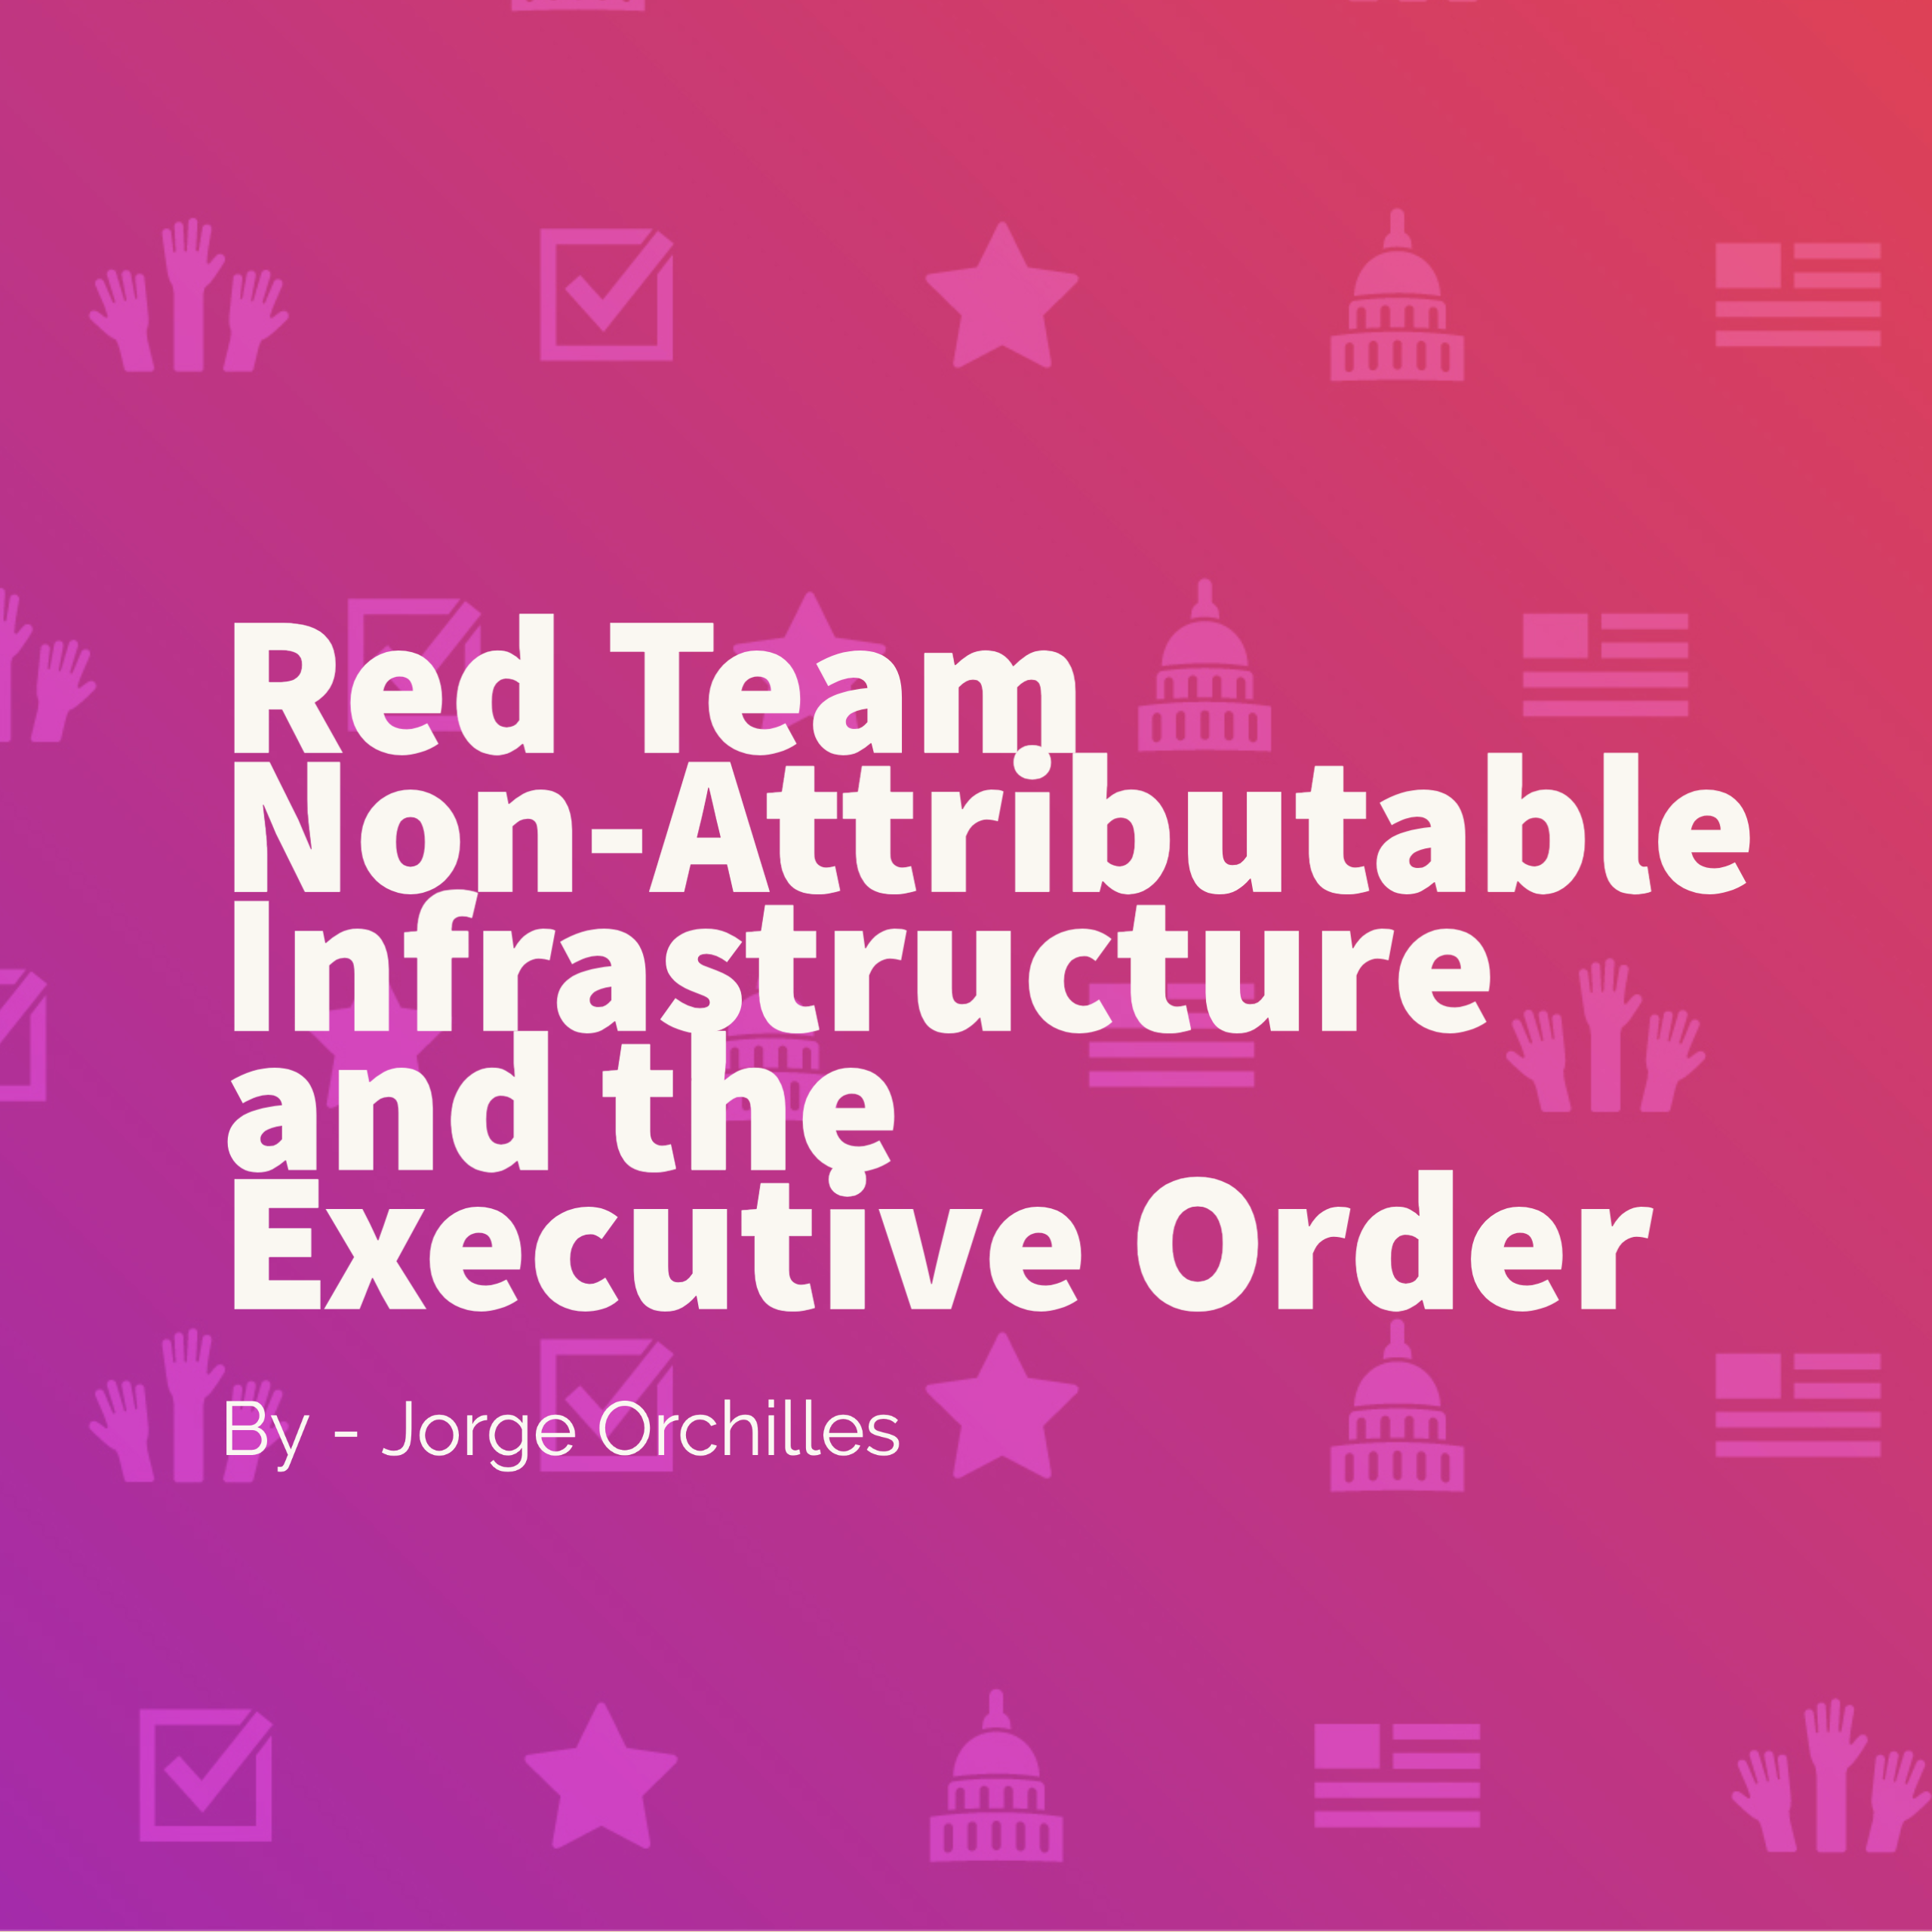 Red Team Non-Attributable Infrastructure and the Executive Order